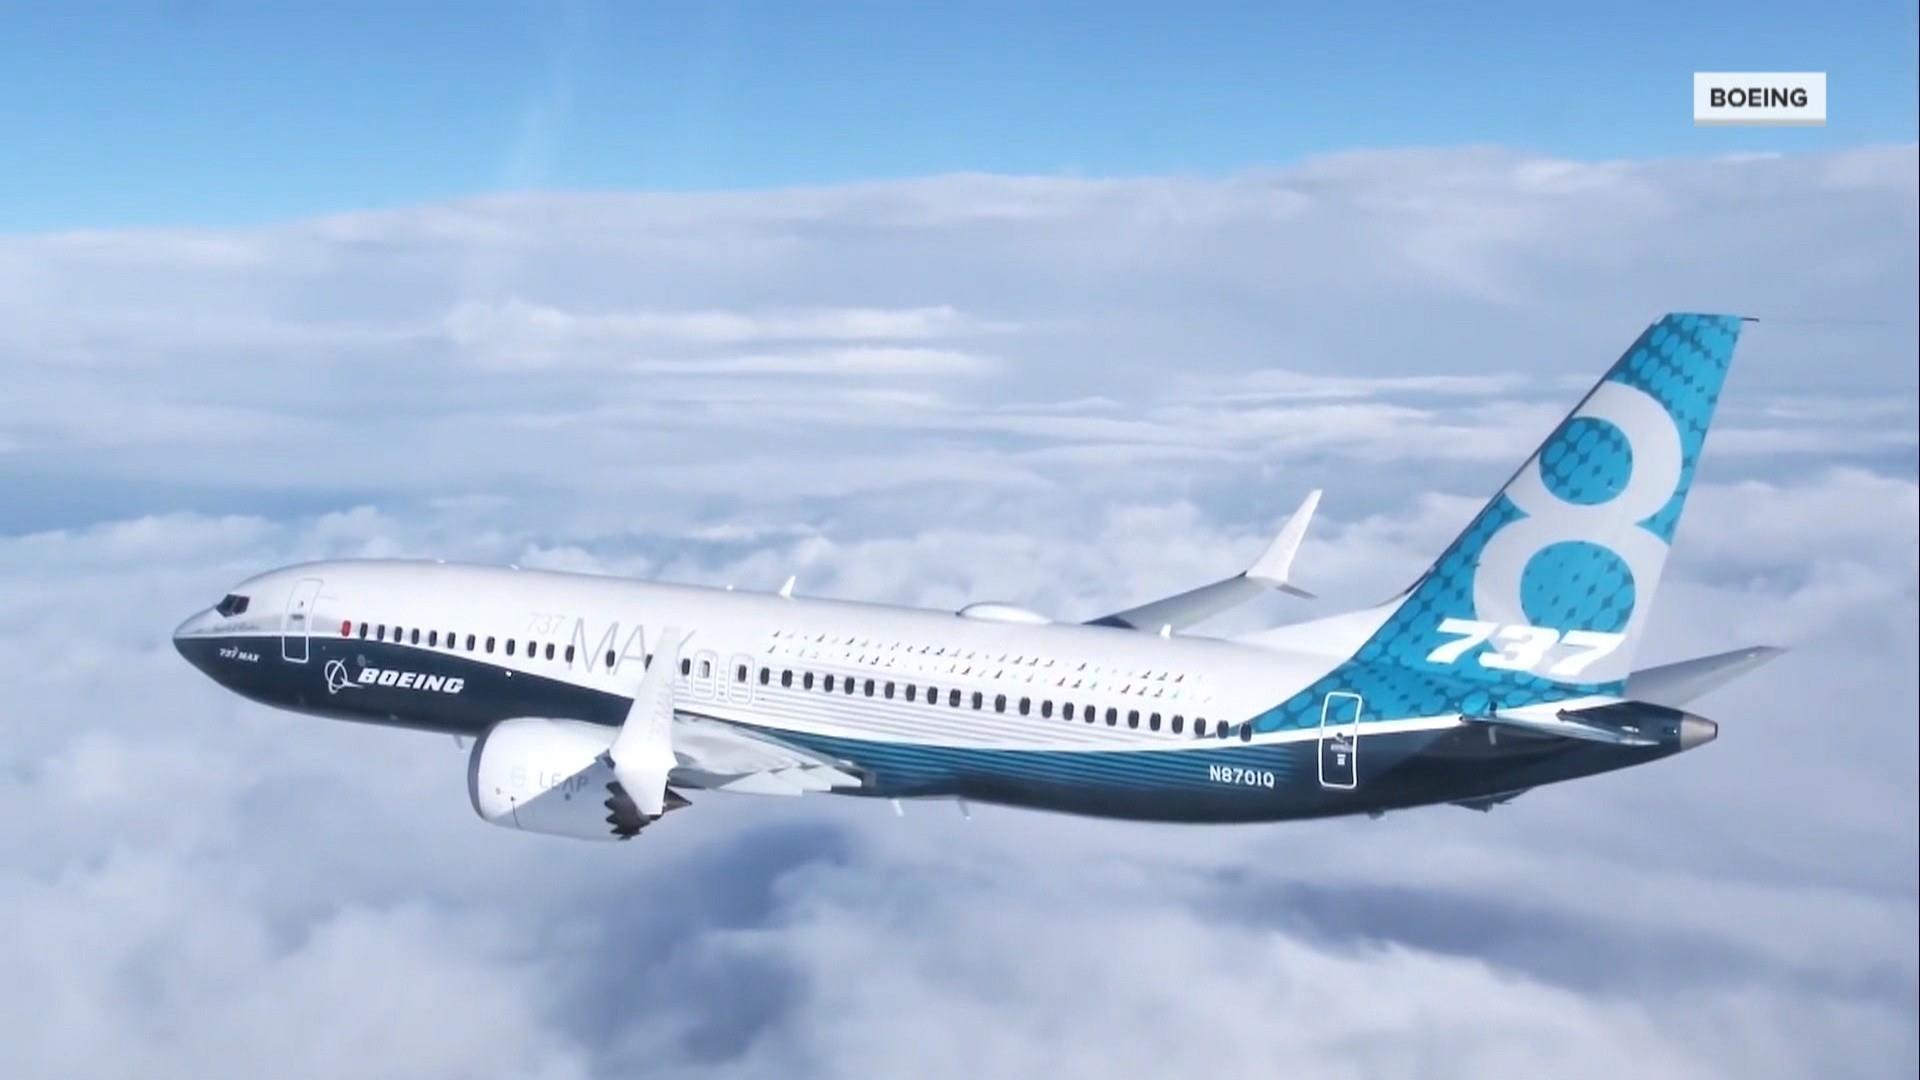 How to know if you’re traveling on Boeing 737 Max 8 jet